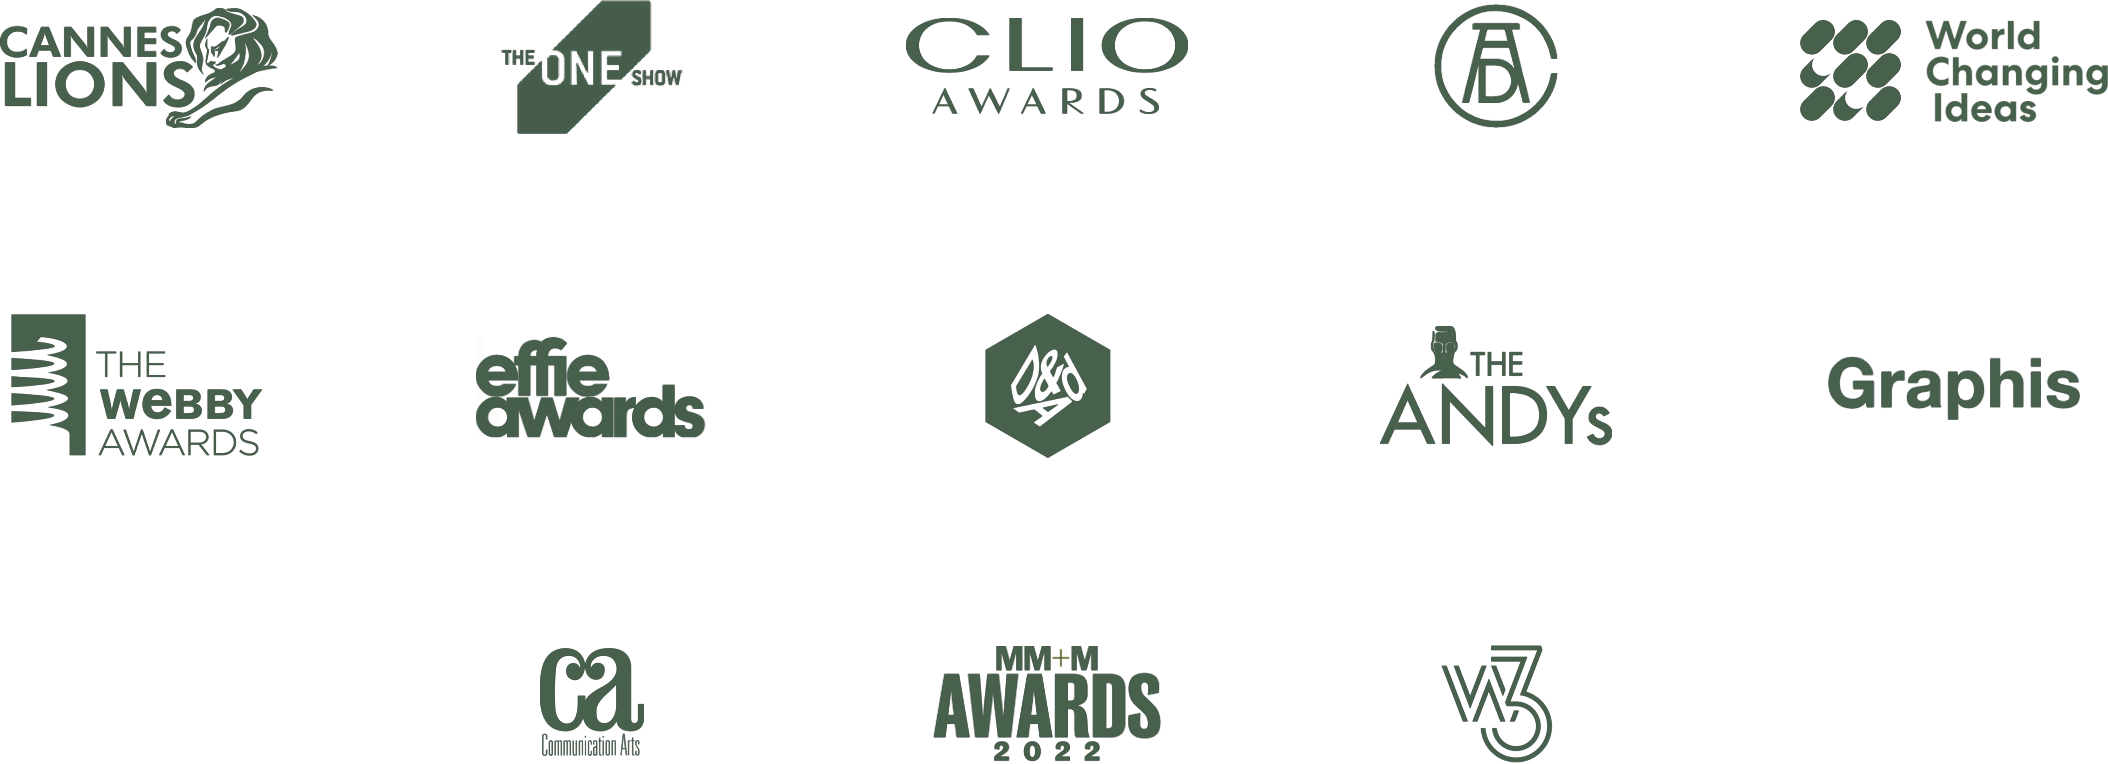 Award logos including Cannes Lions, CLIO Awards, The Webby Awards, MM+M Awards and others.